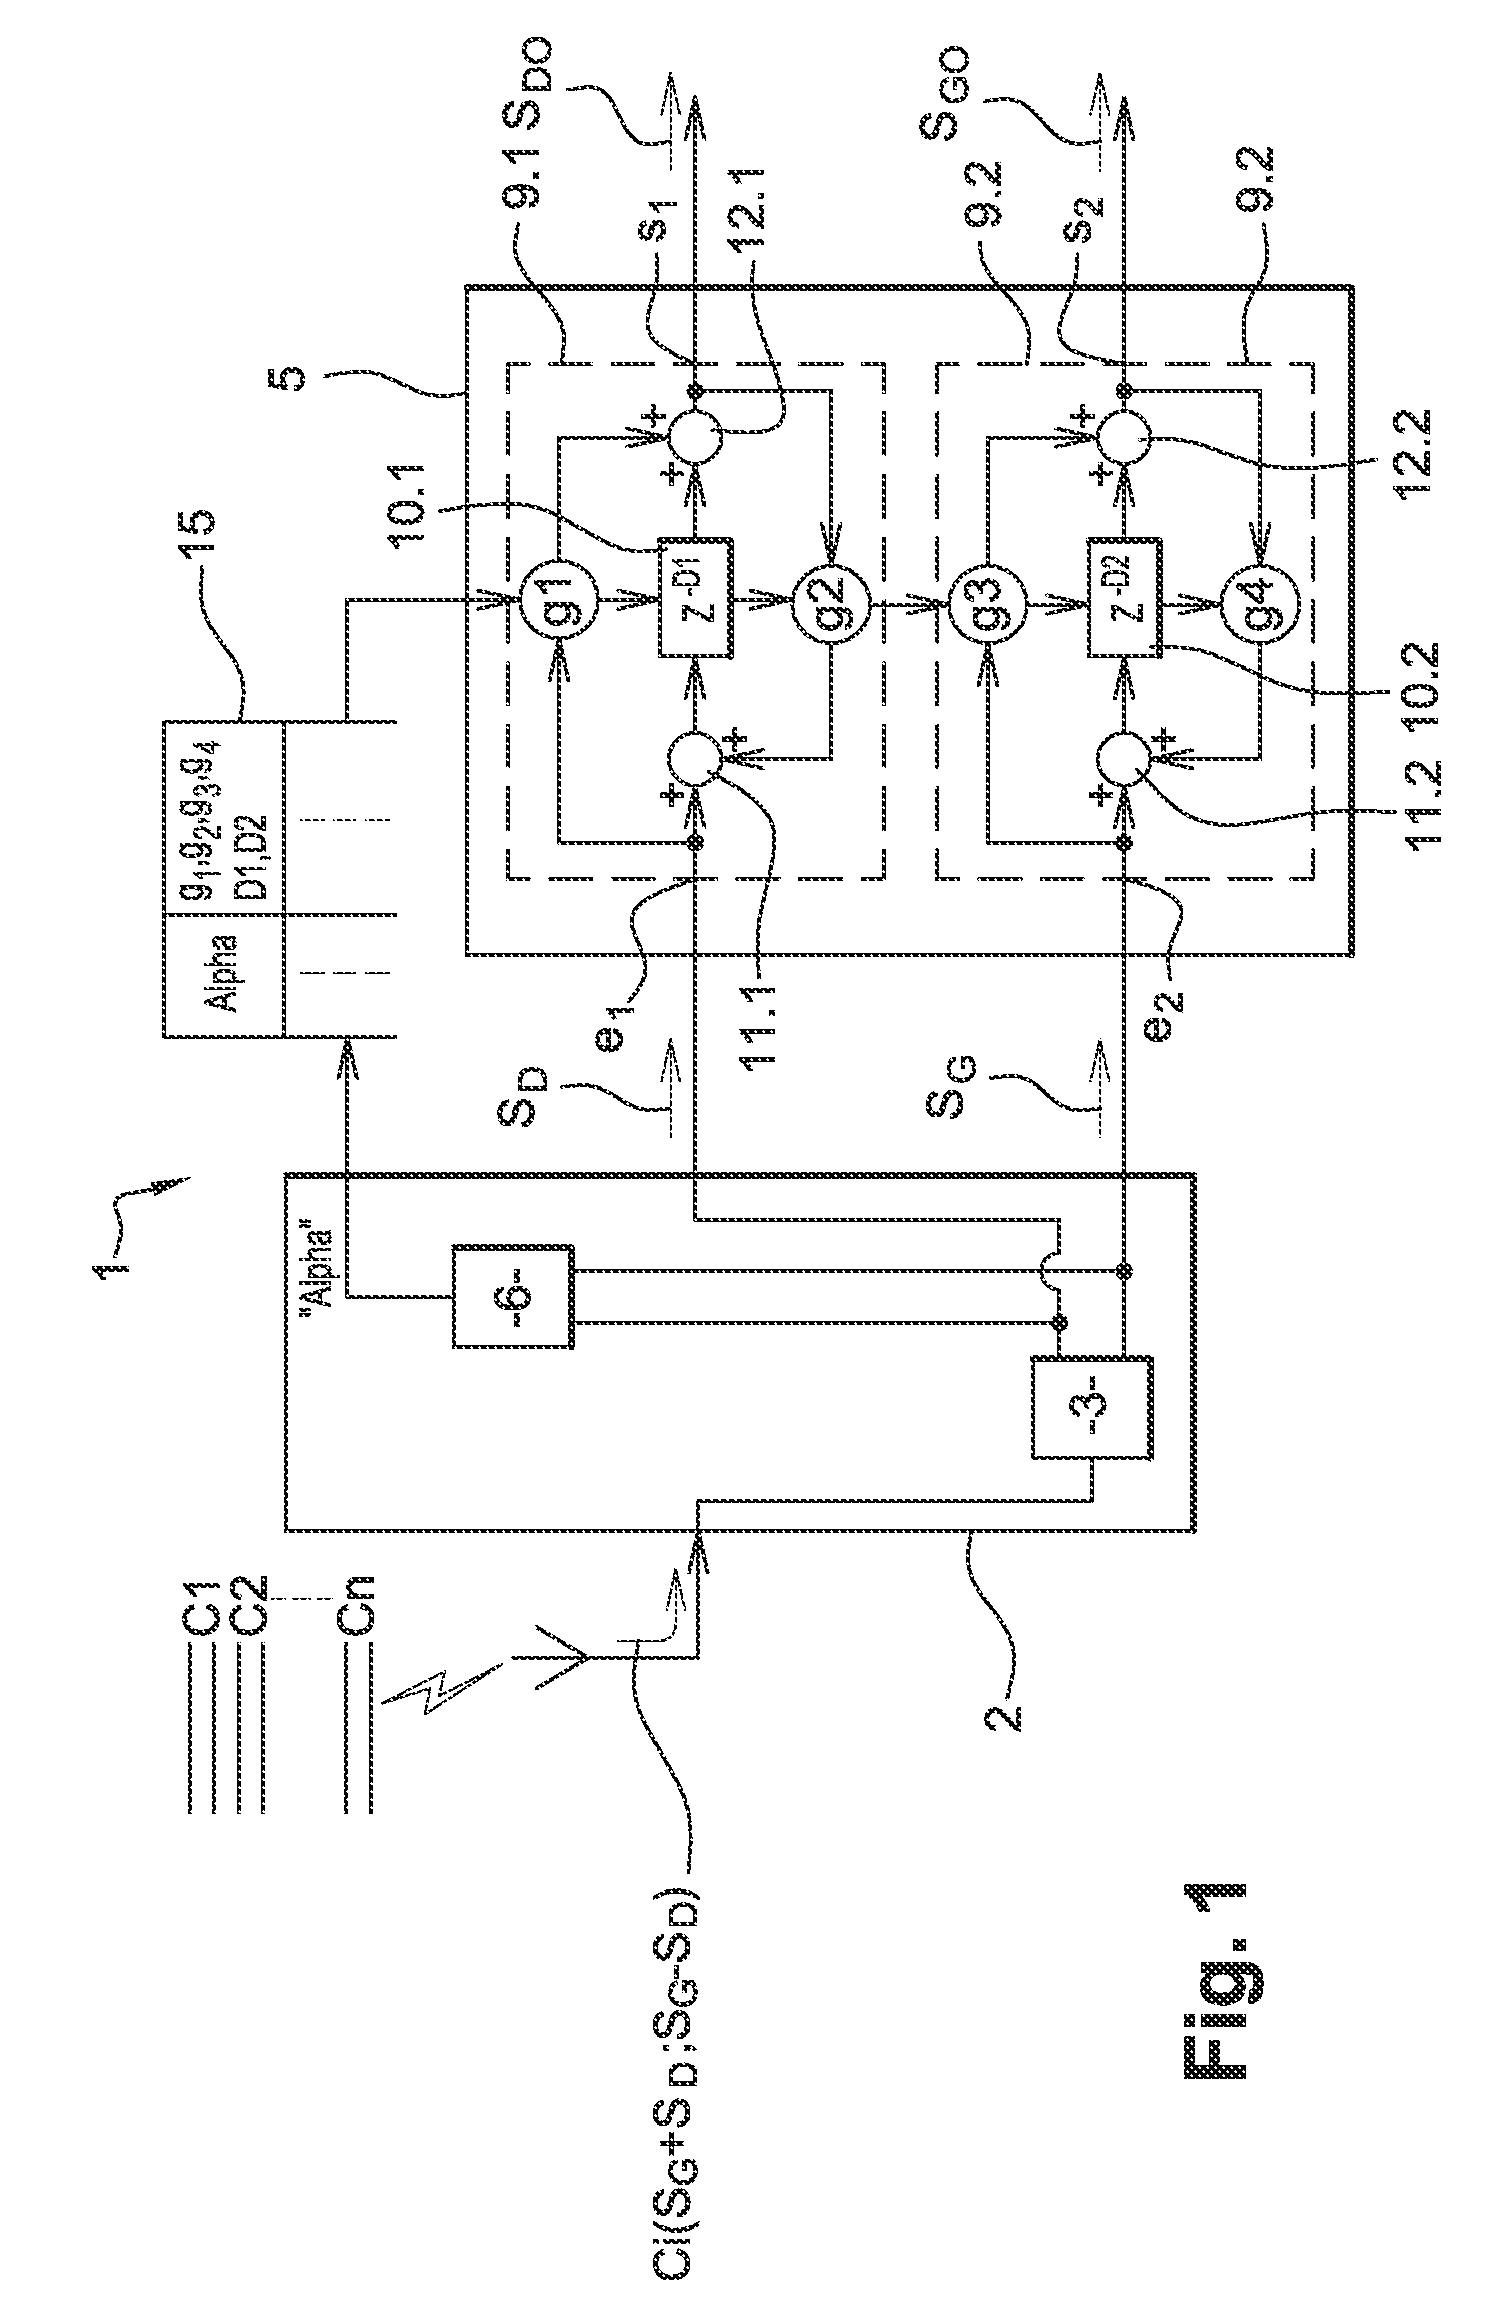 Method for optimizing the stereo reception for an analog radio set and associated analog radio receiver